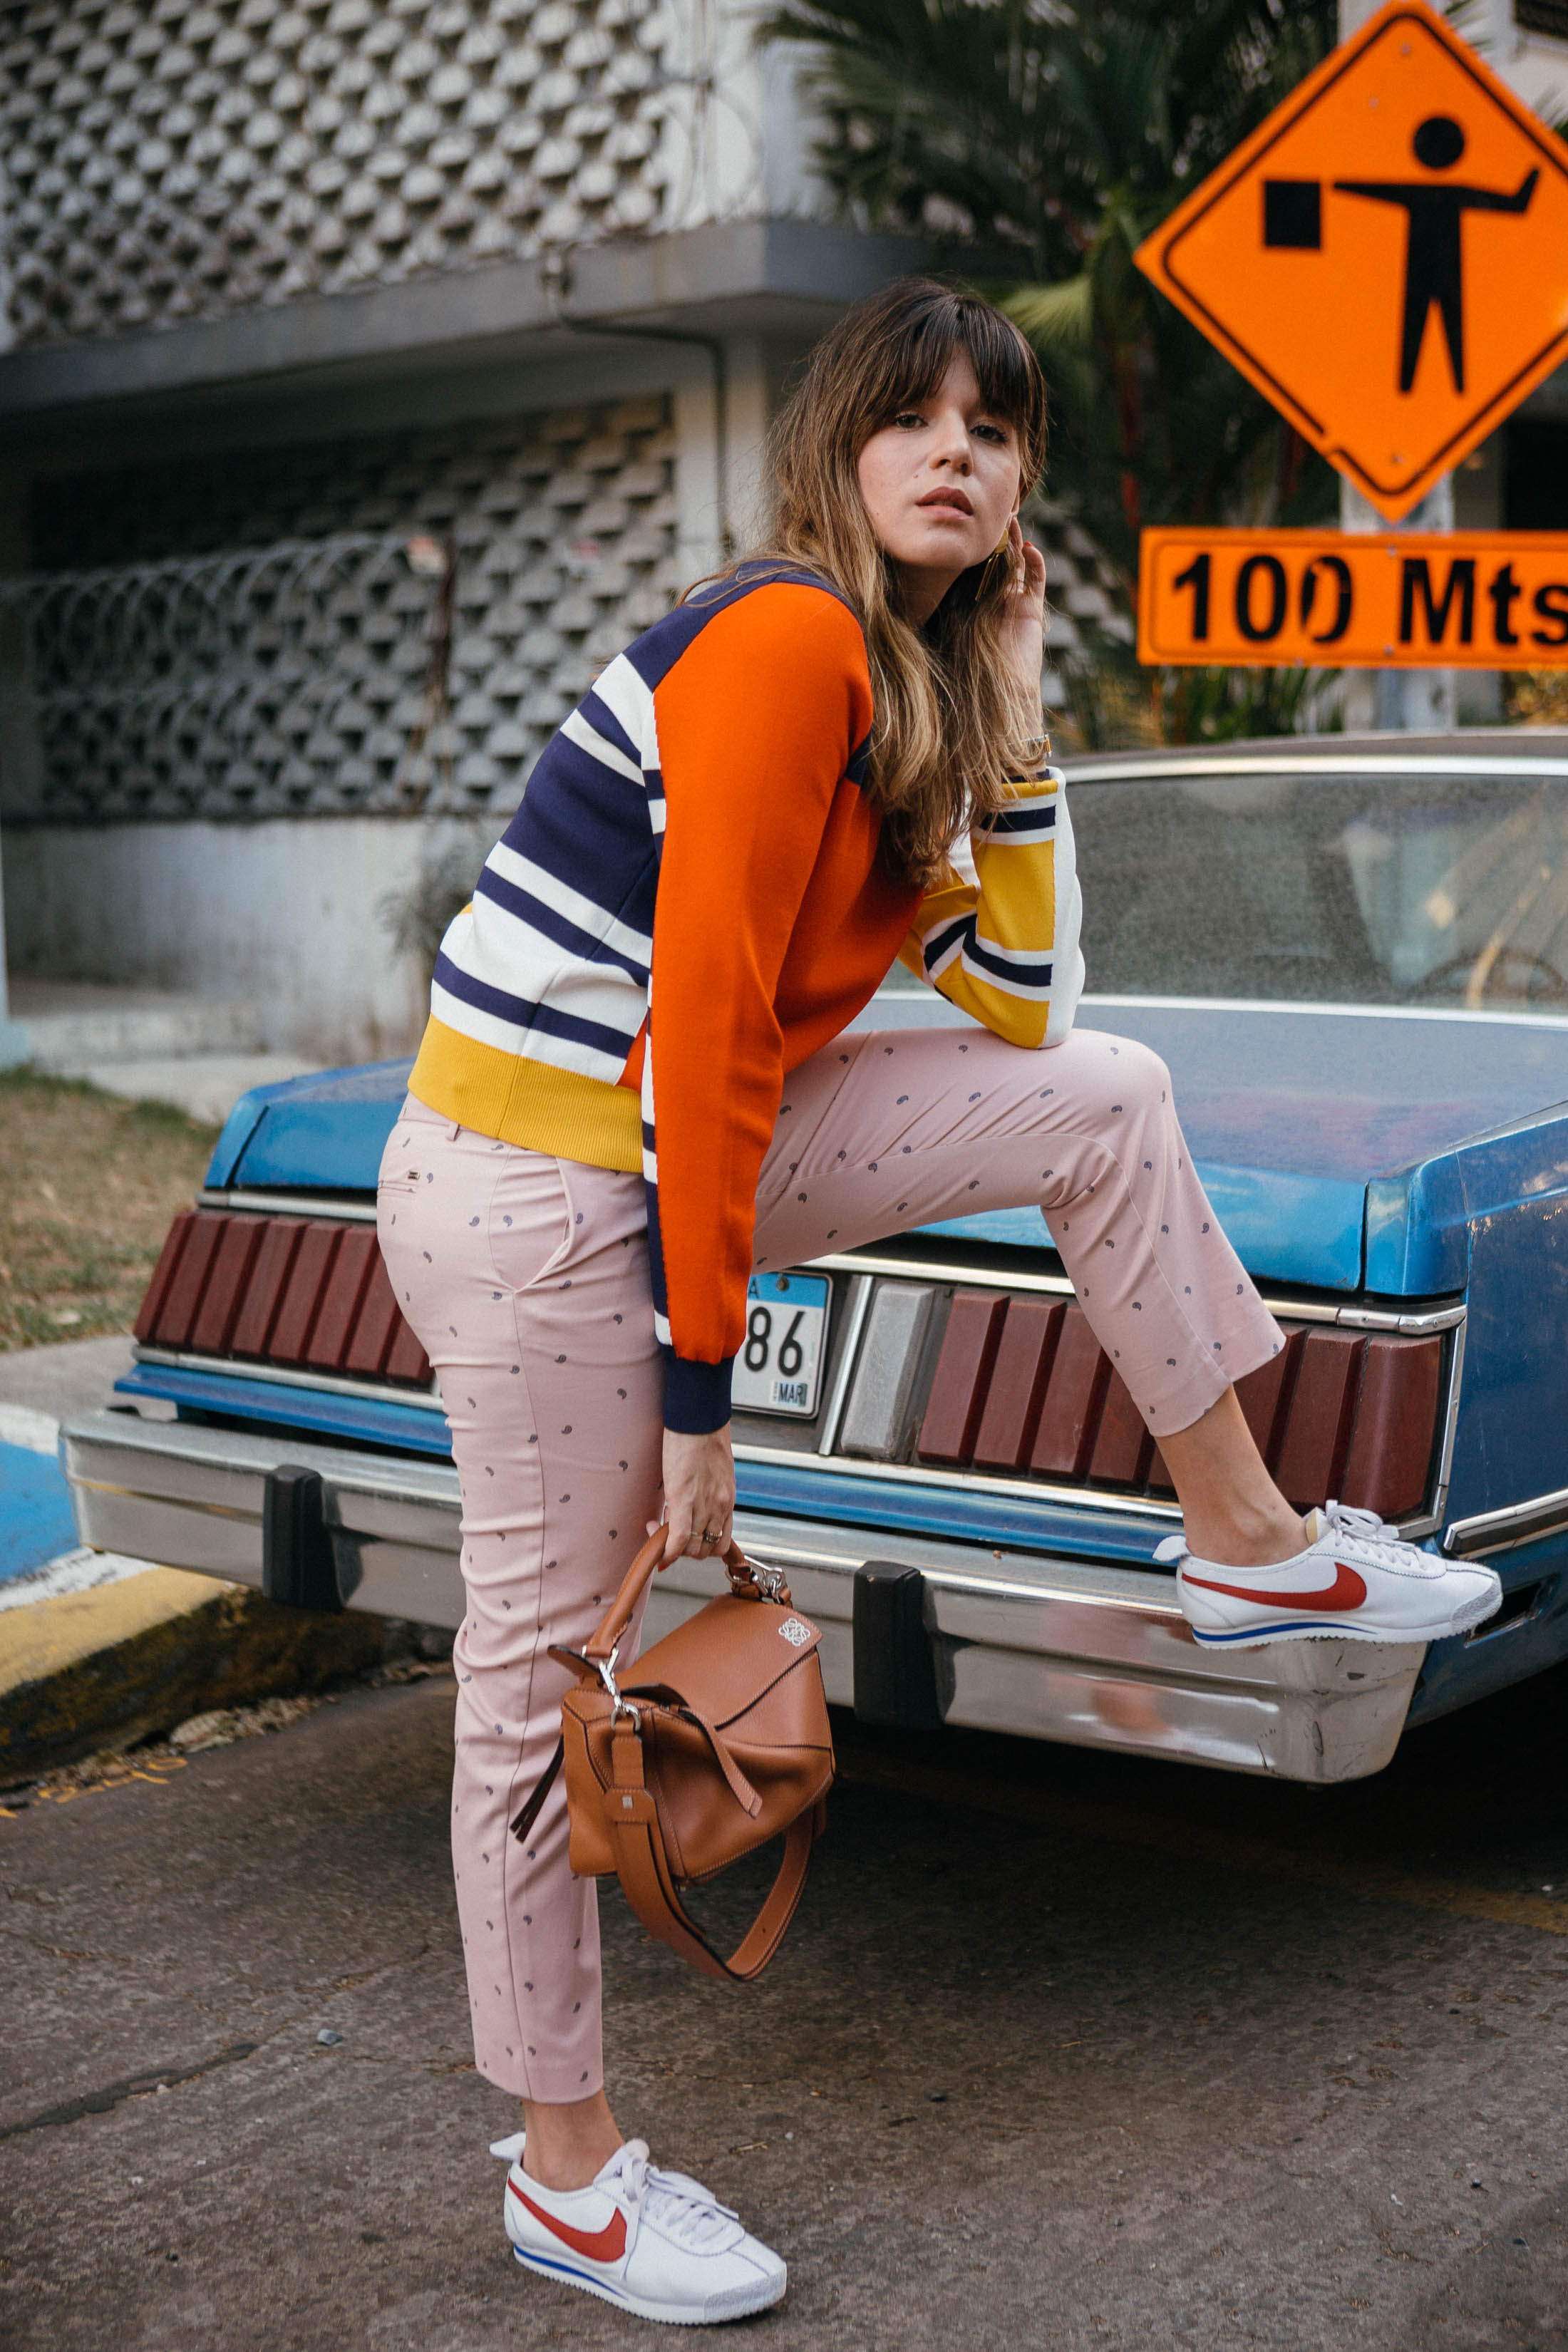 Maristella wears a chic sporty colorful look from Tommy Hilfiger Tommyland collection